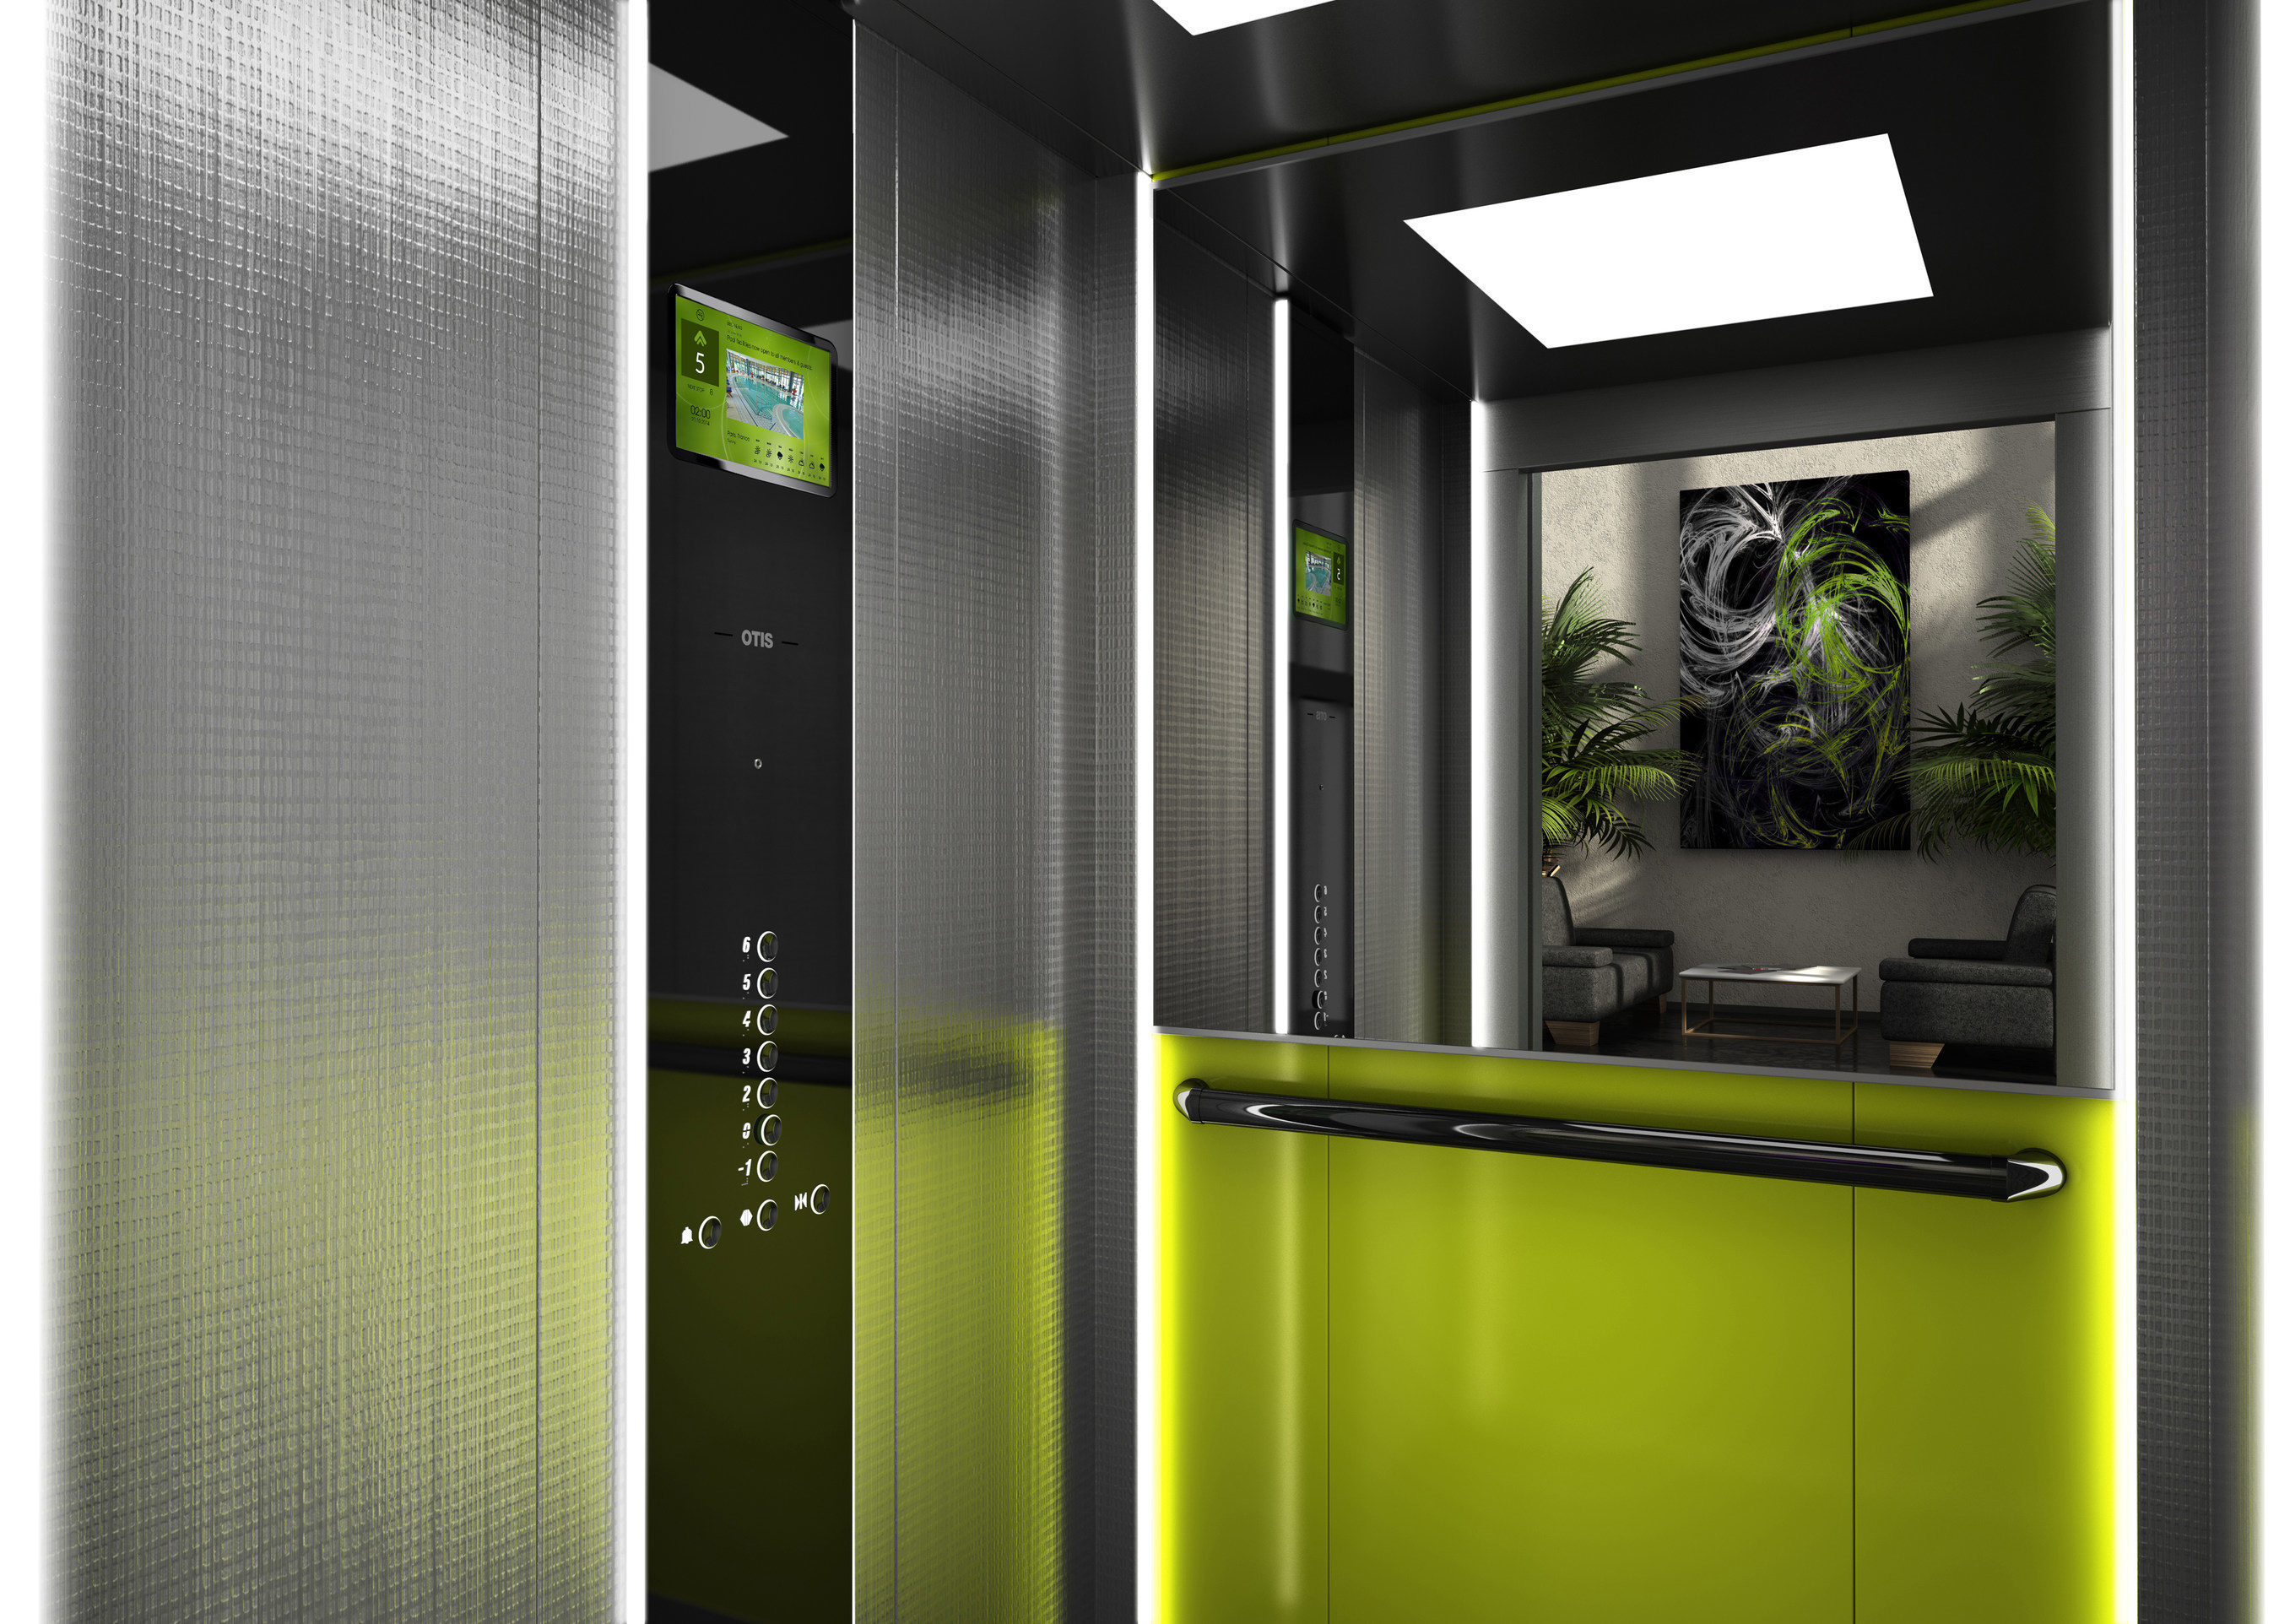 In addition to increased connectivity, the New Gen2 elevator also features enhanced aesthetic options, providing more than 400,000 possible combinations of textures, colors, lighting and materials to fit any architectural style.